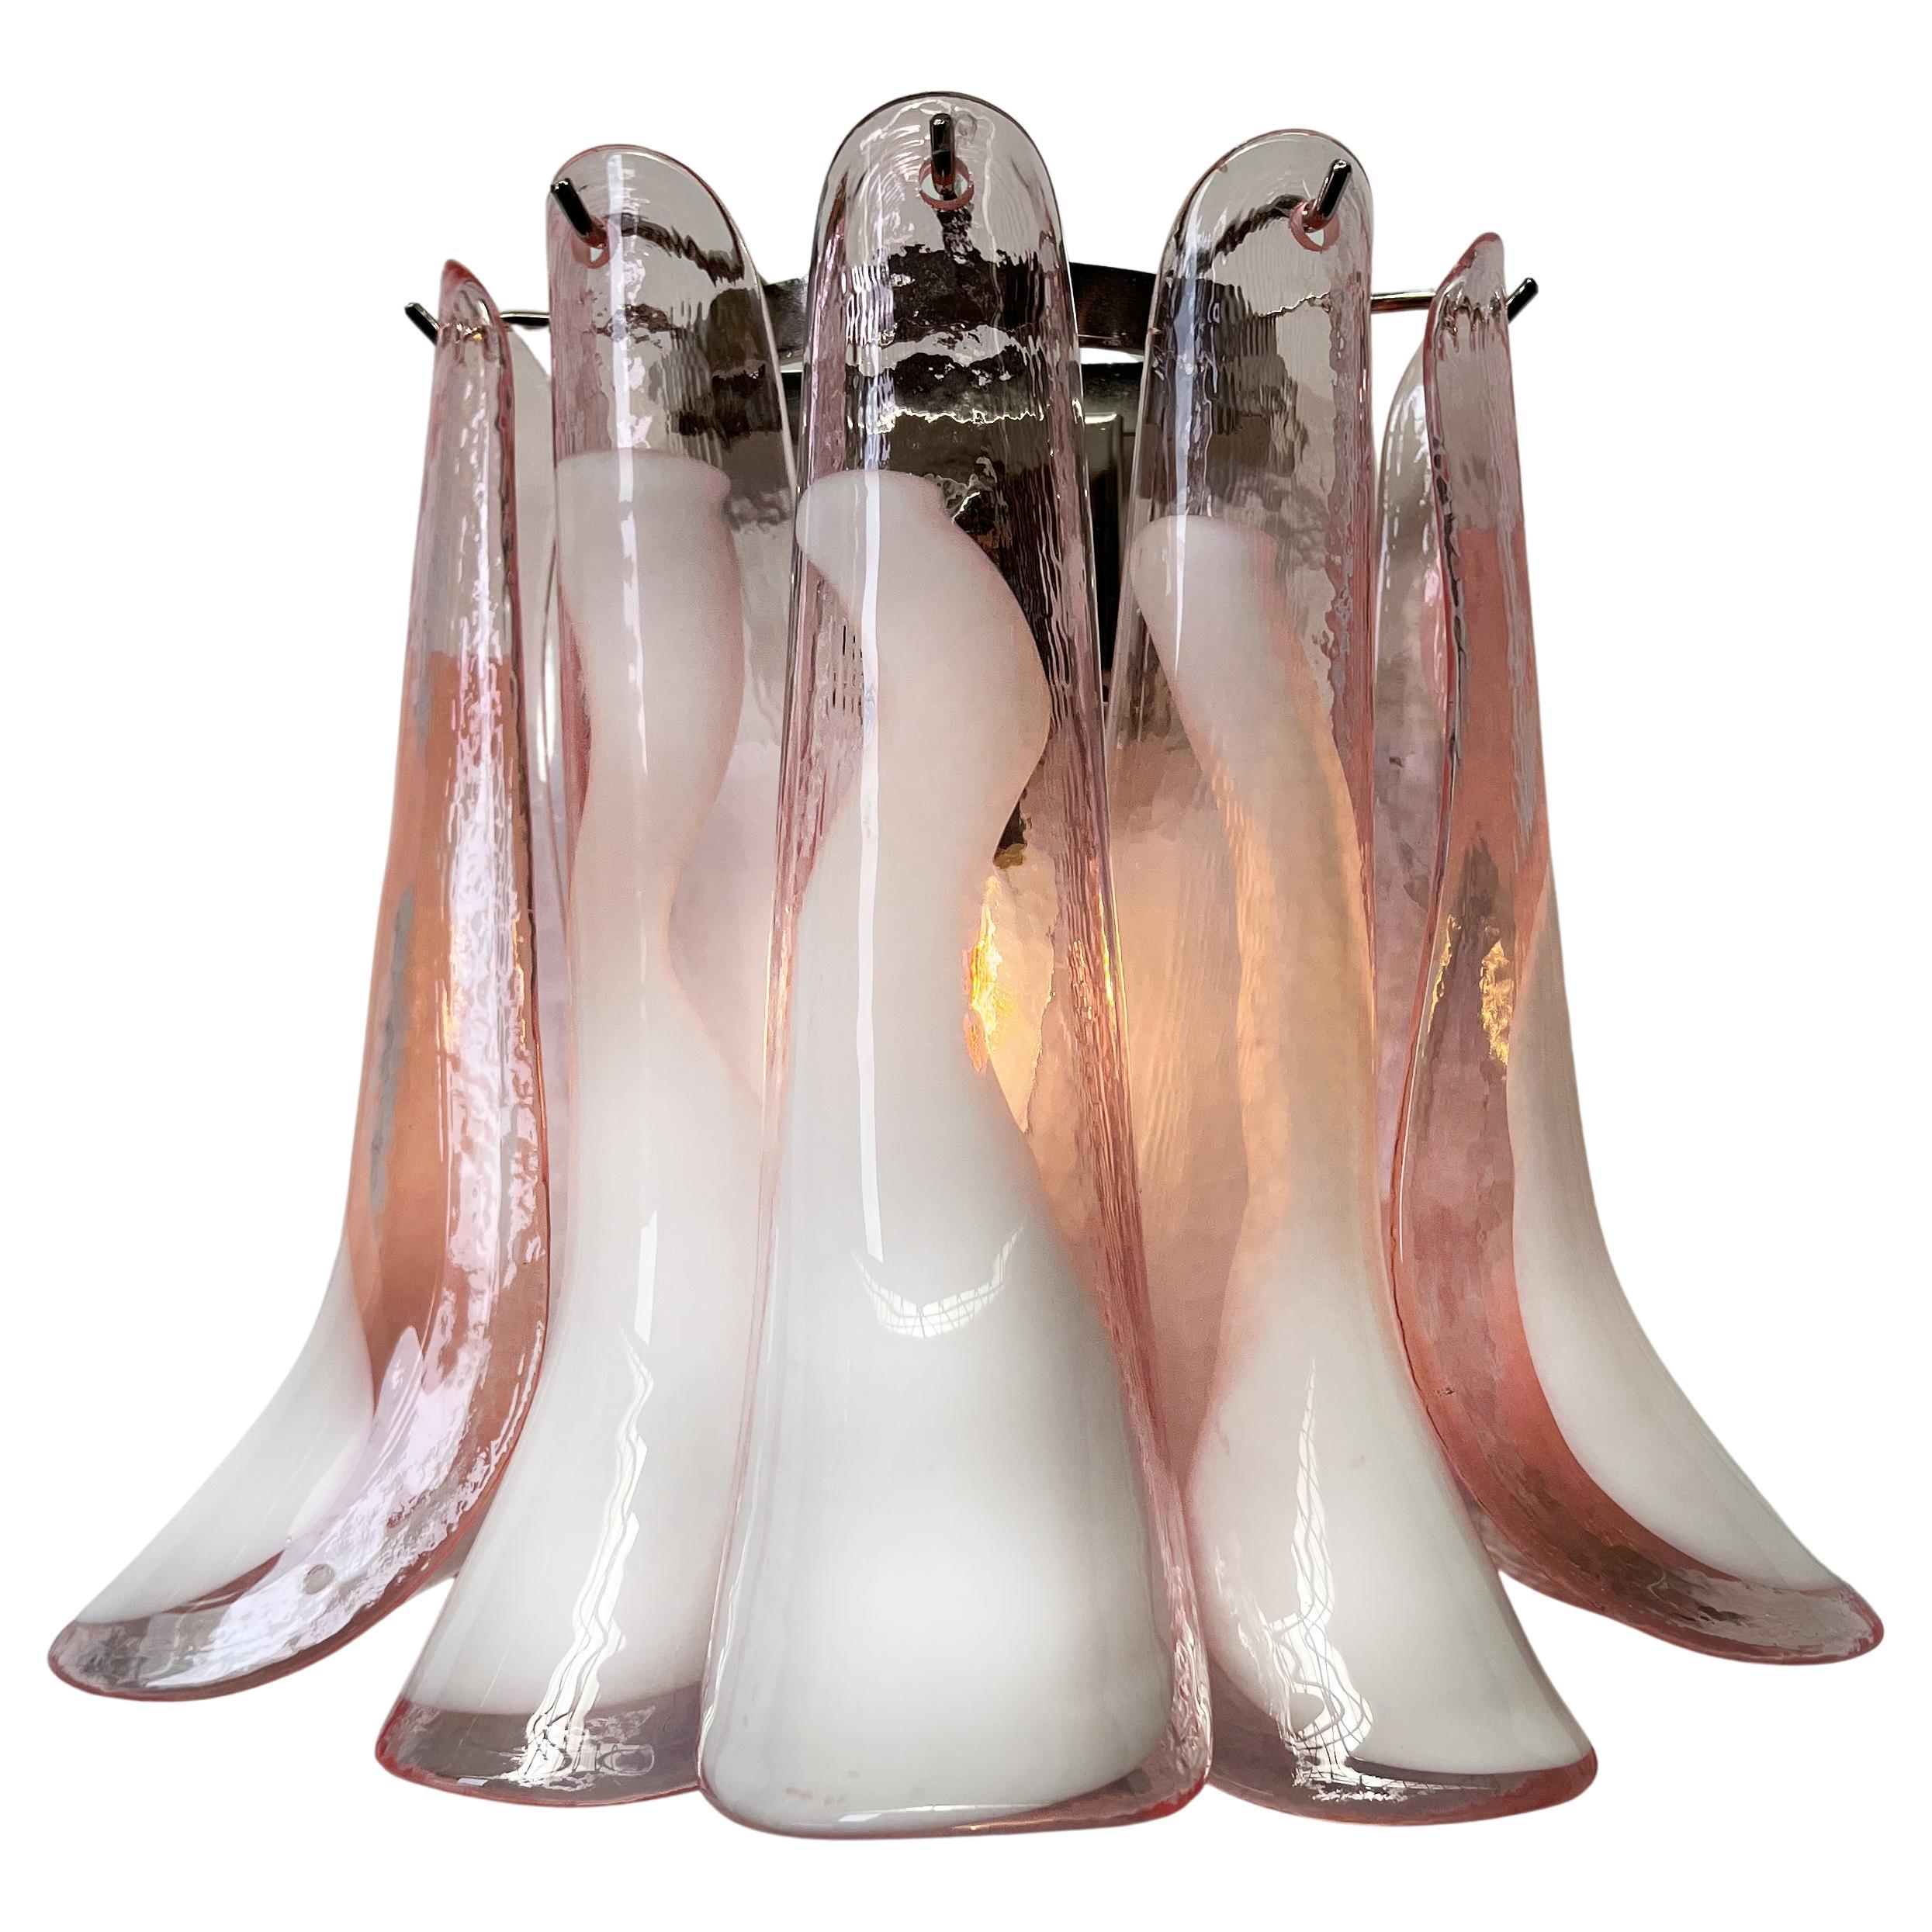 Pair Italian Murano sconces. They were originally produced by a Murano glass factory called 